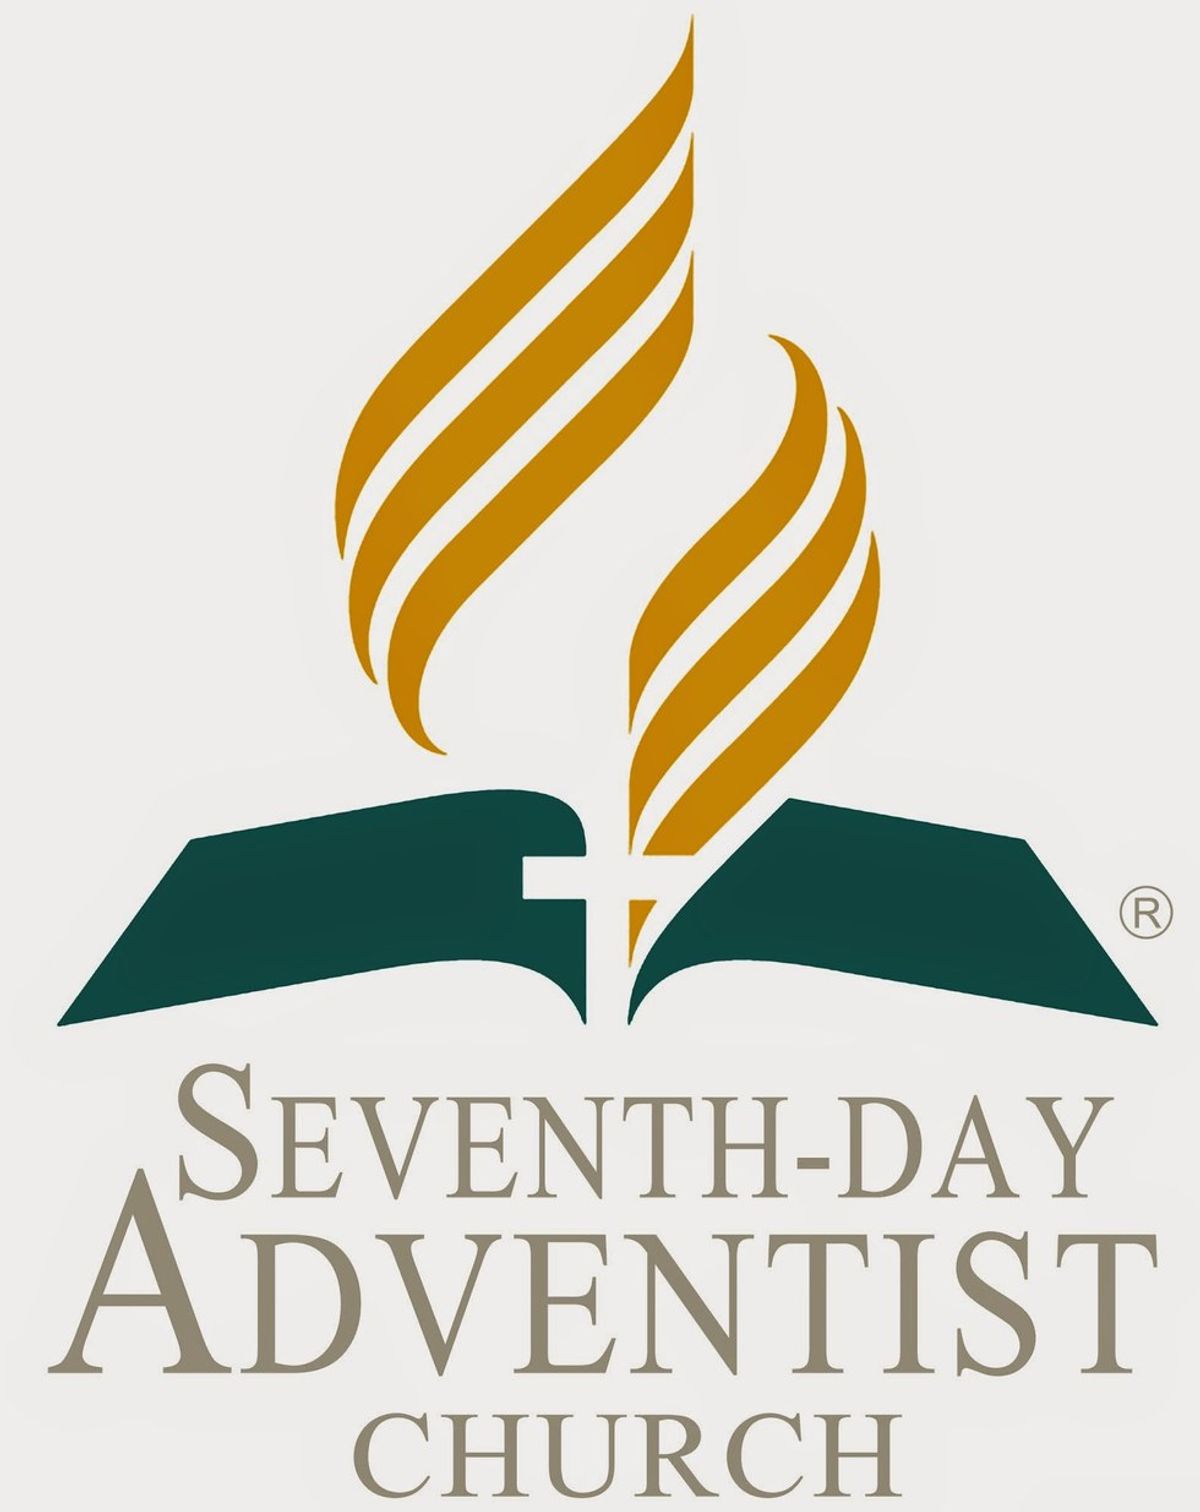 Growing up Seventh Day Adventist